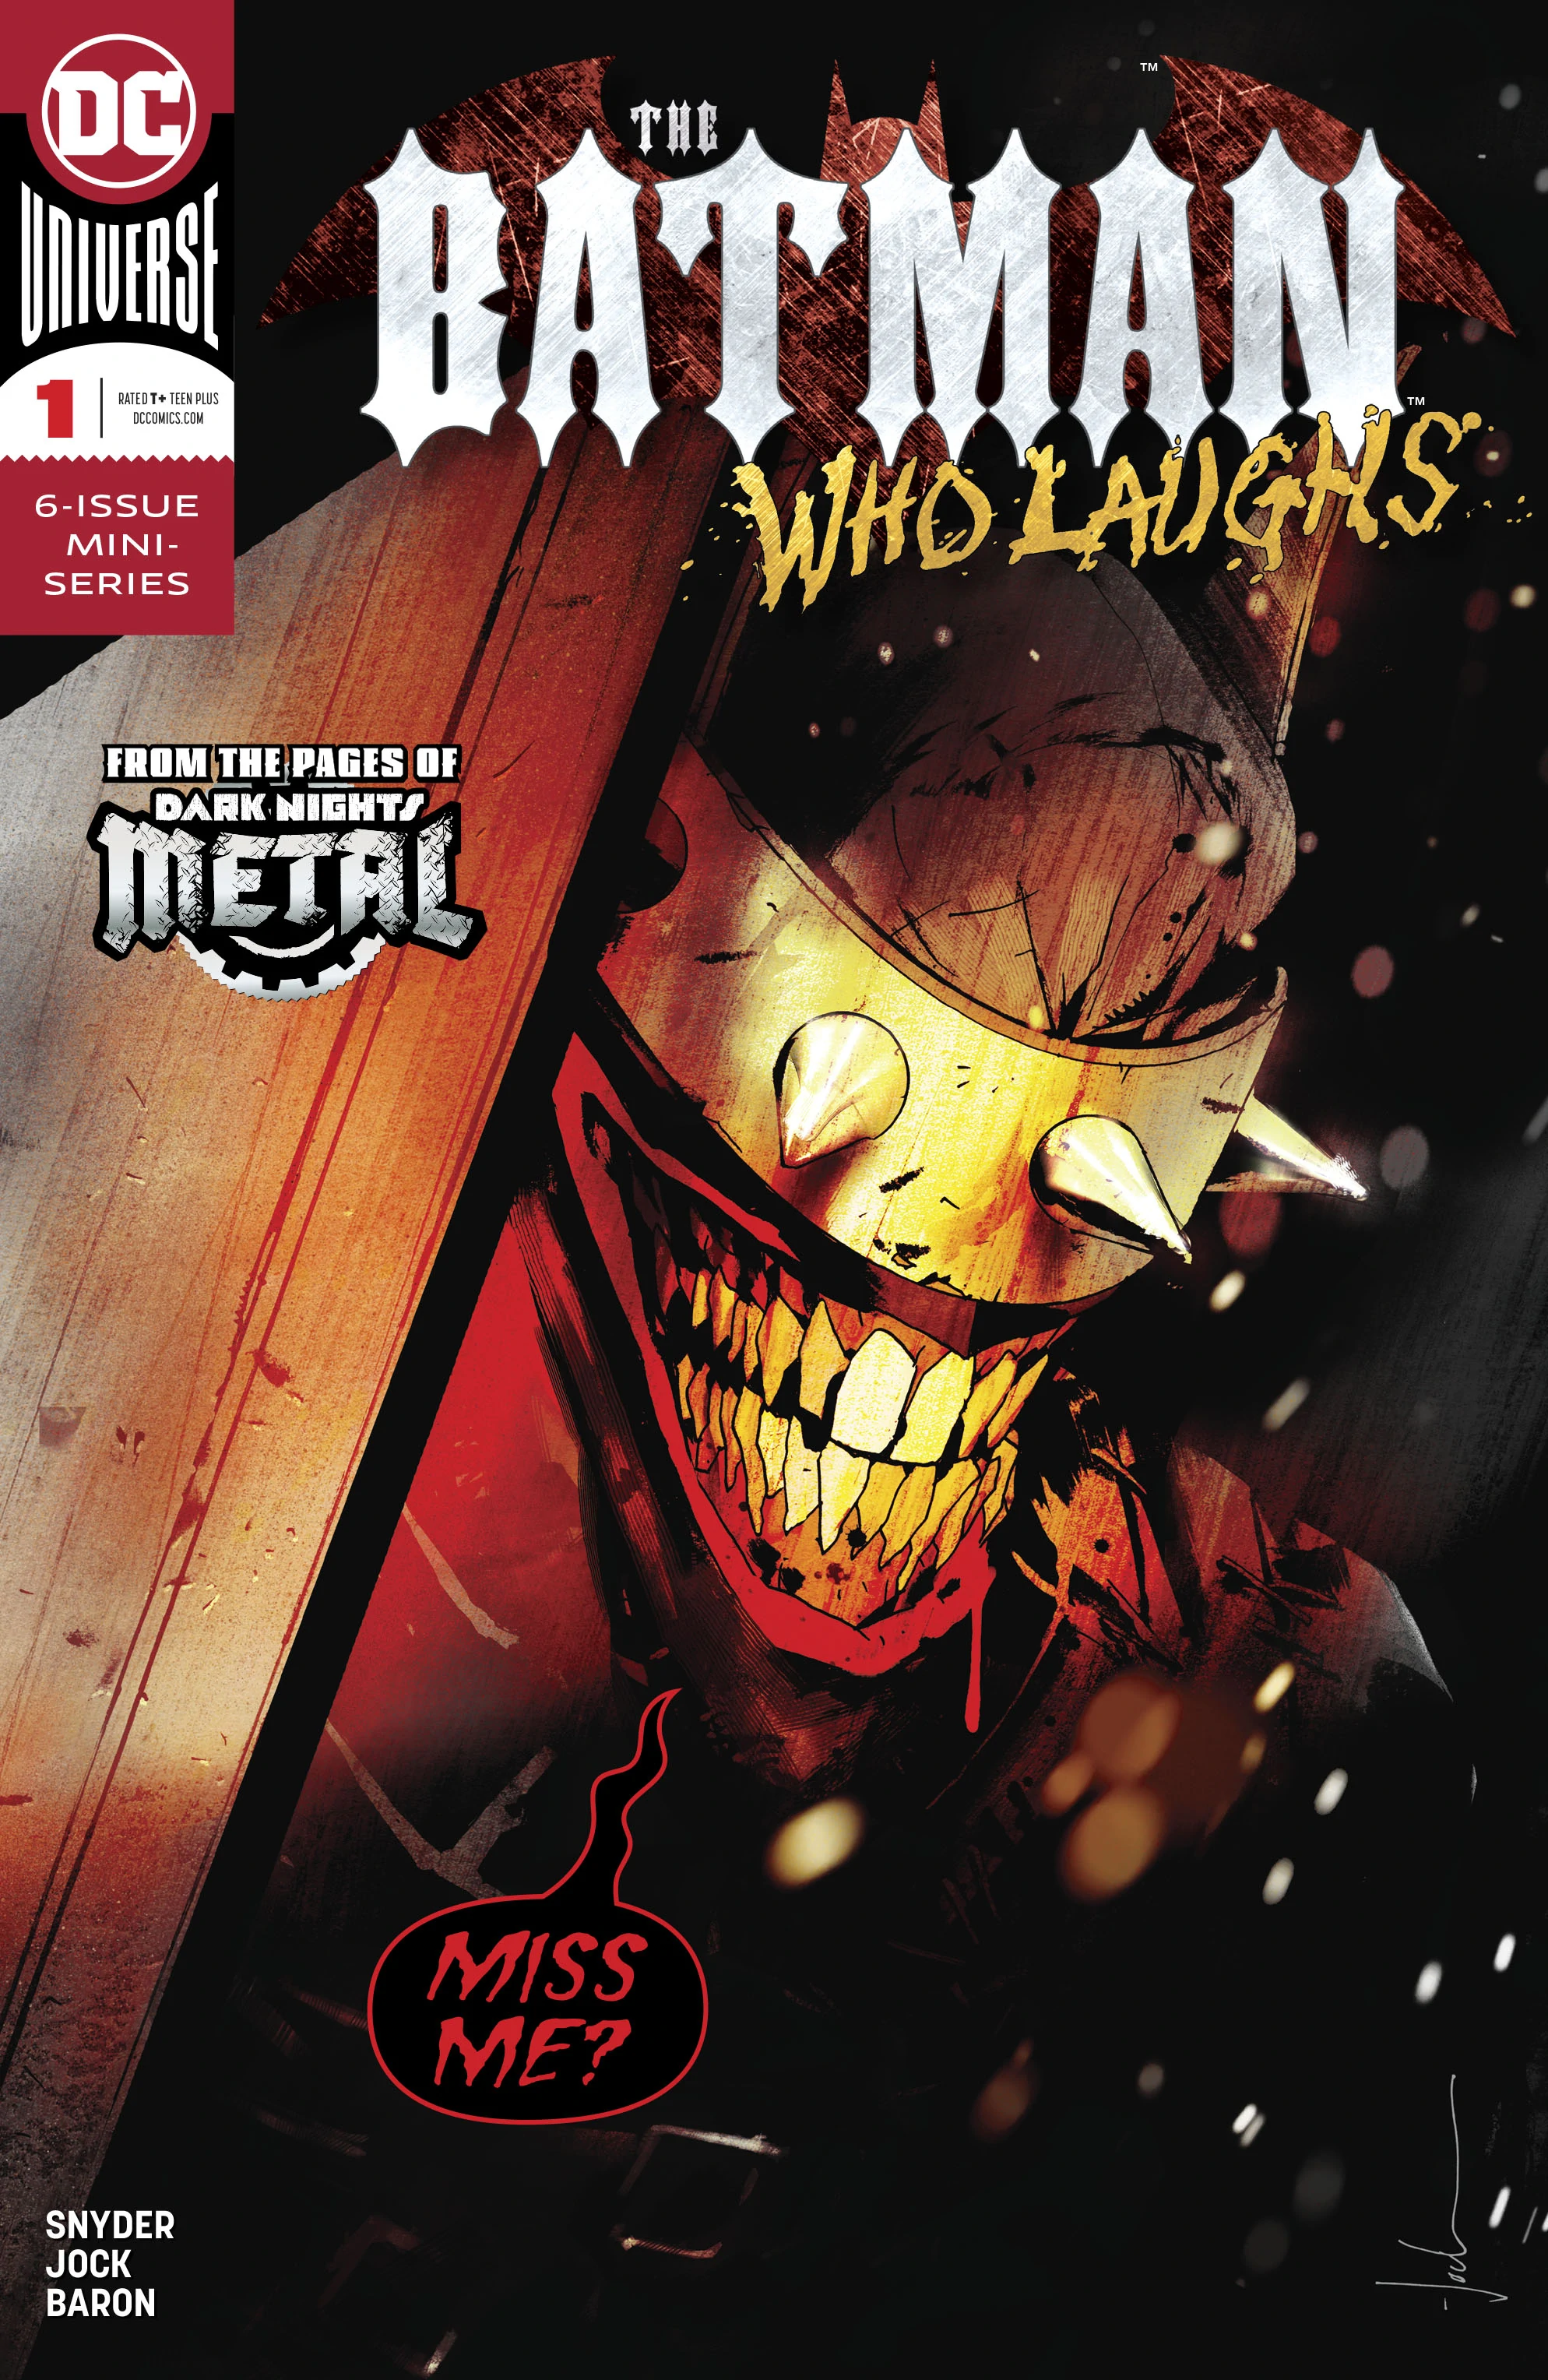 Cover of Batman who laughs